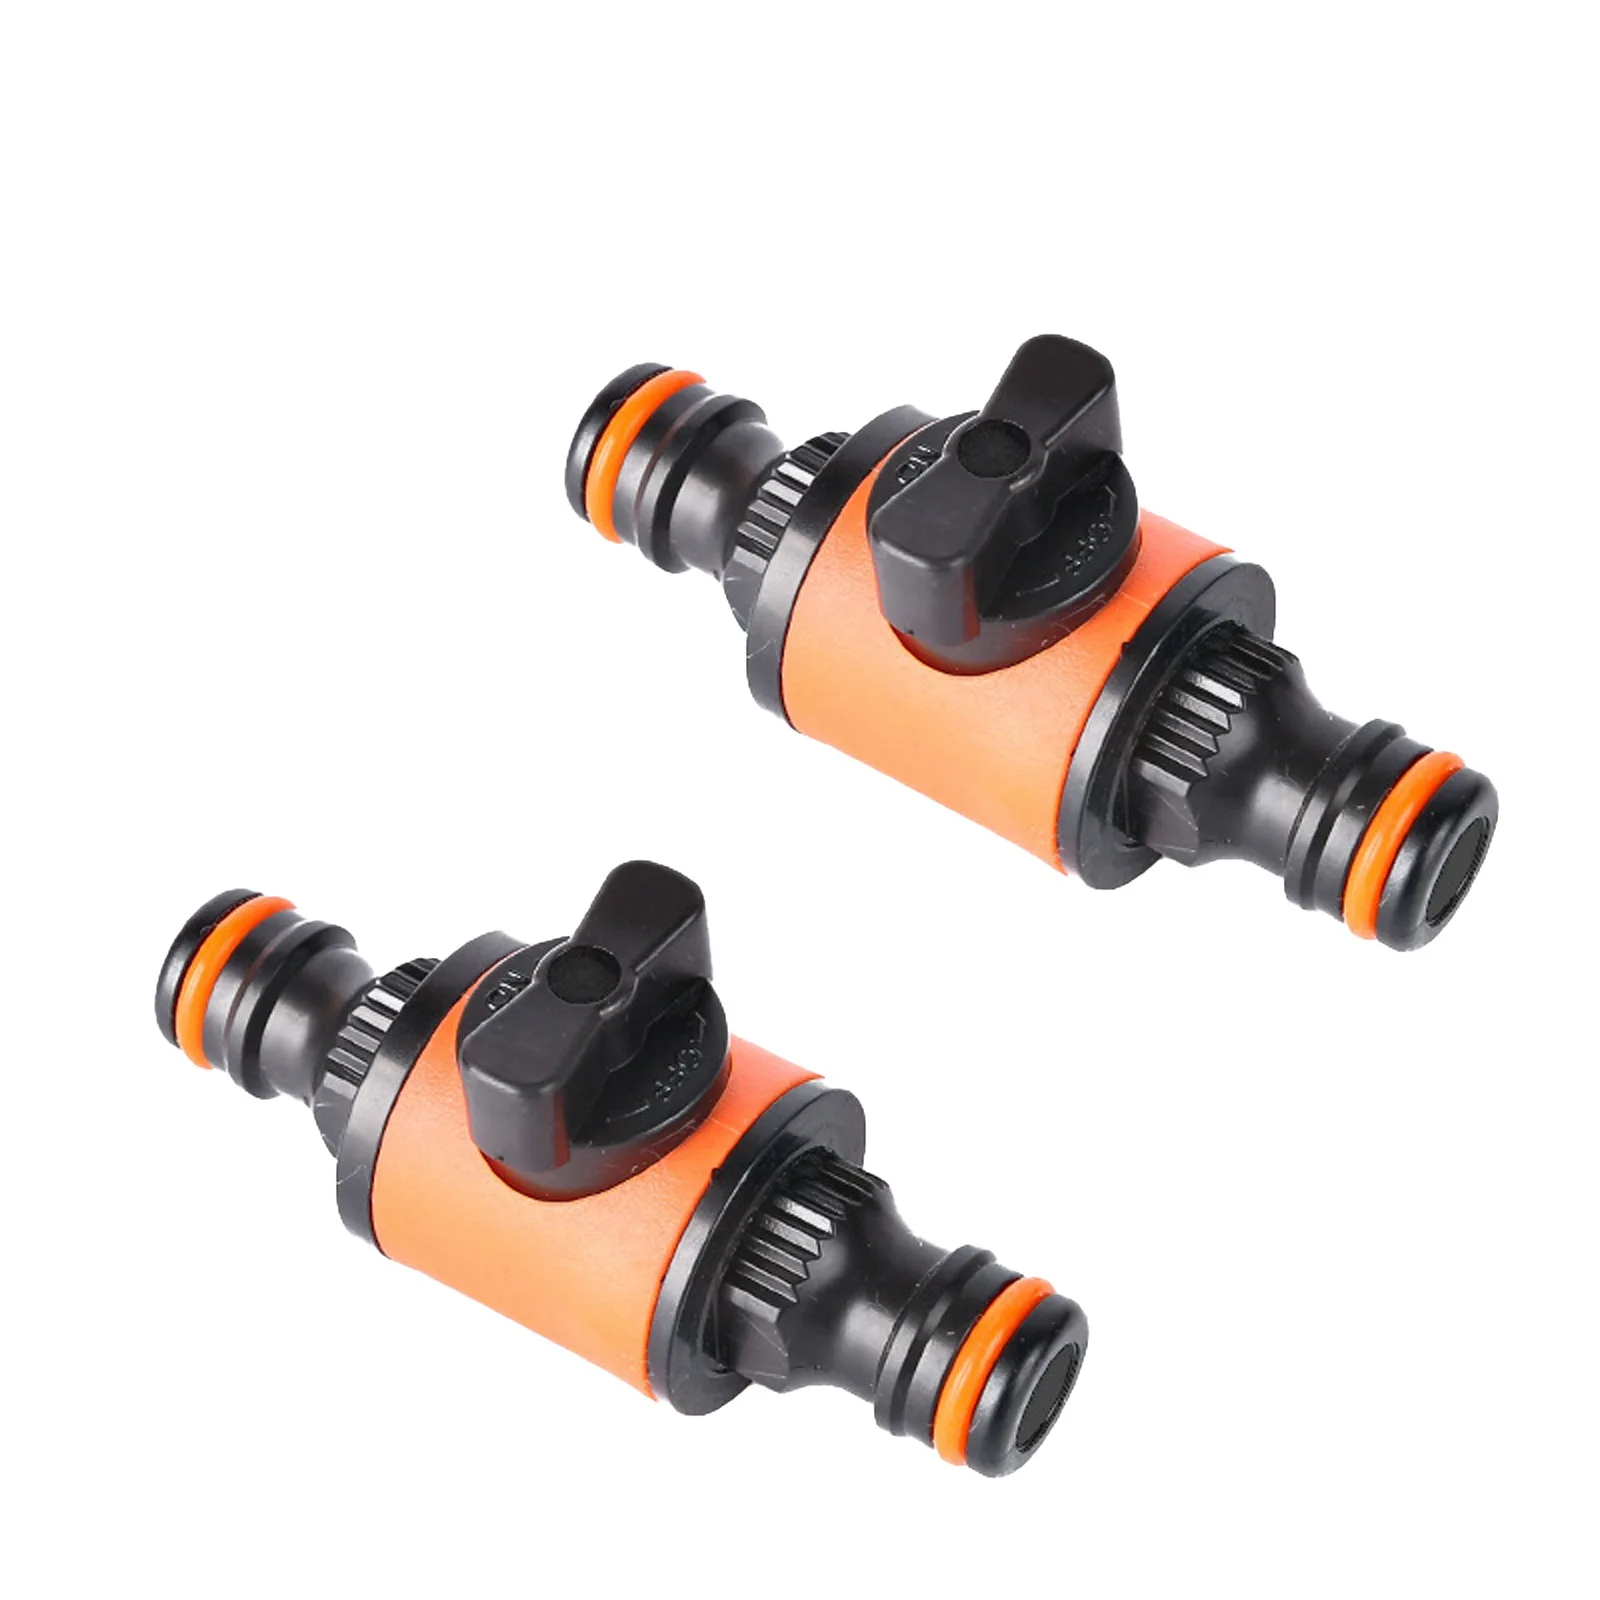 

2PC Garden Hose Pipe In-Line Faucet Tap Shut Off Valve Fitting Watering Irrigation Connector 16mm Quick Coupler Orange